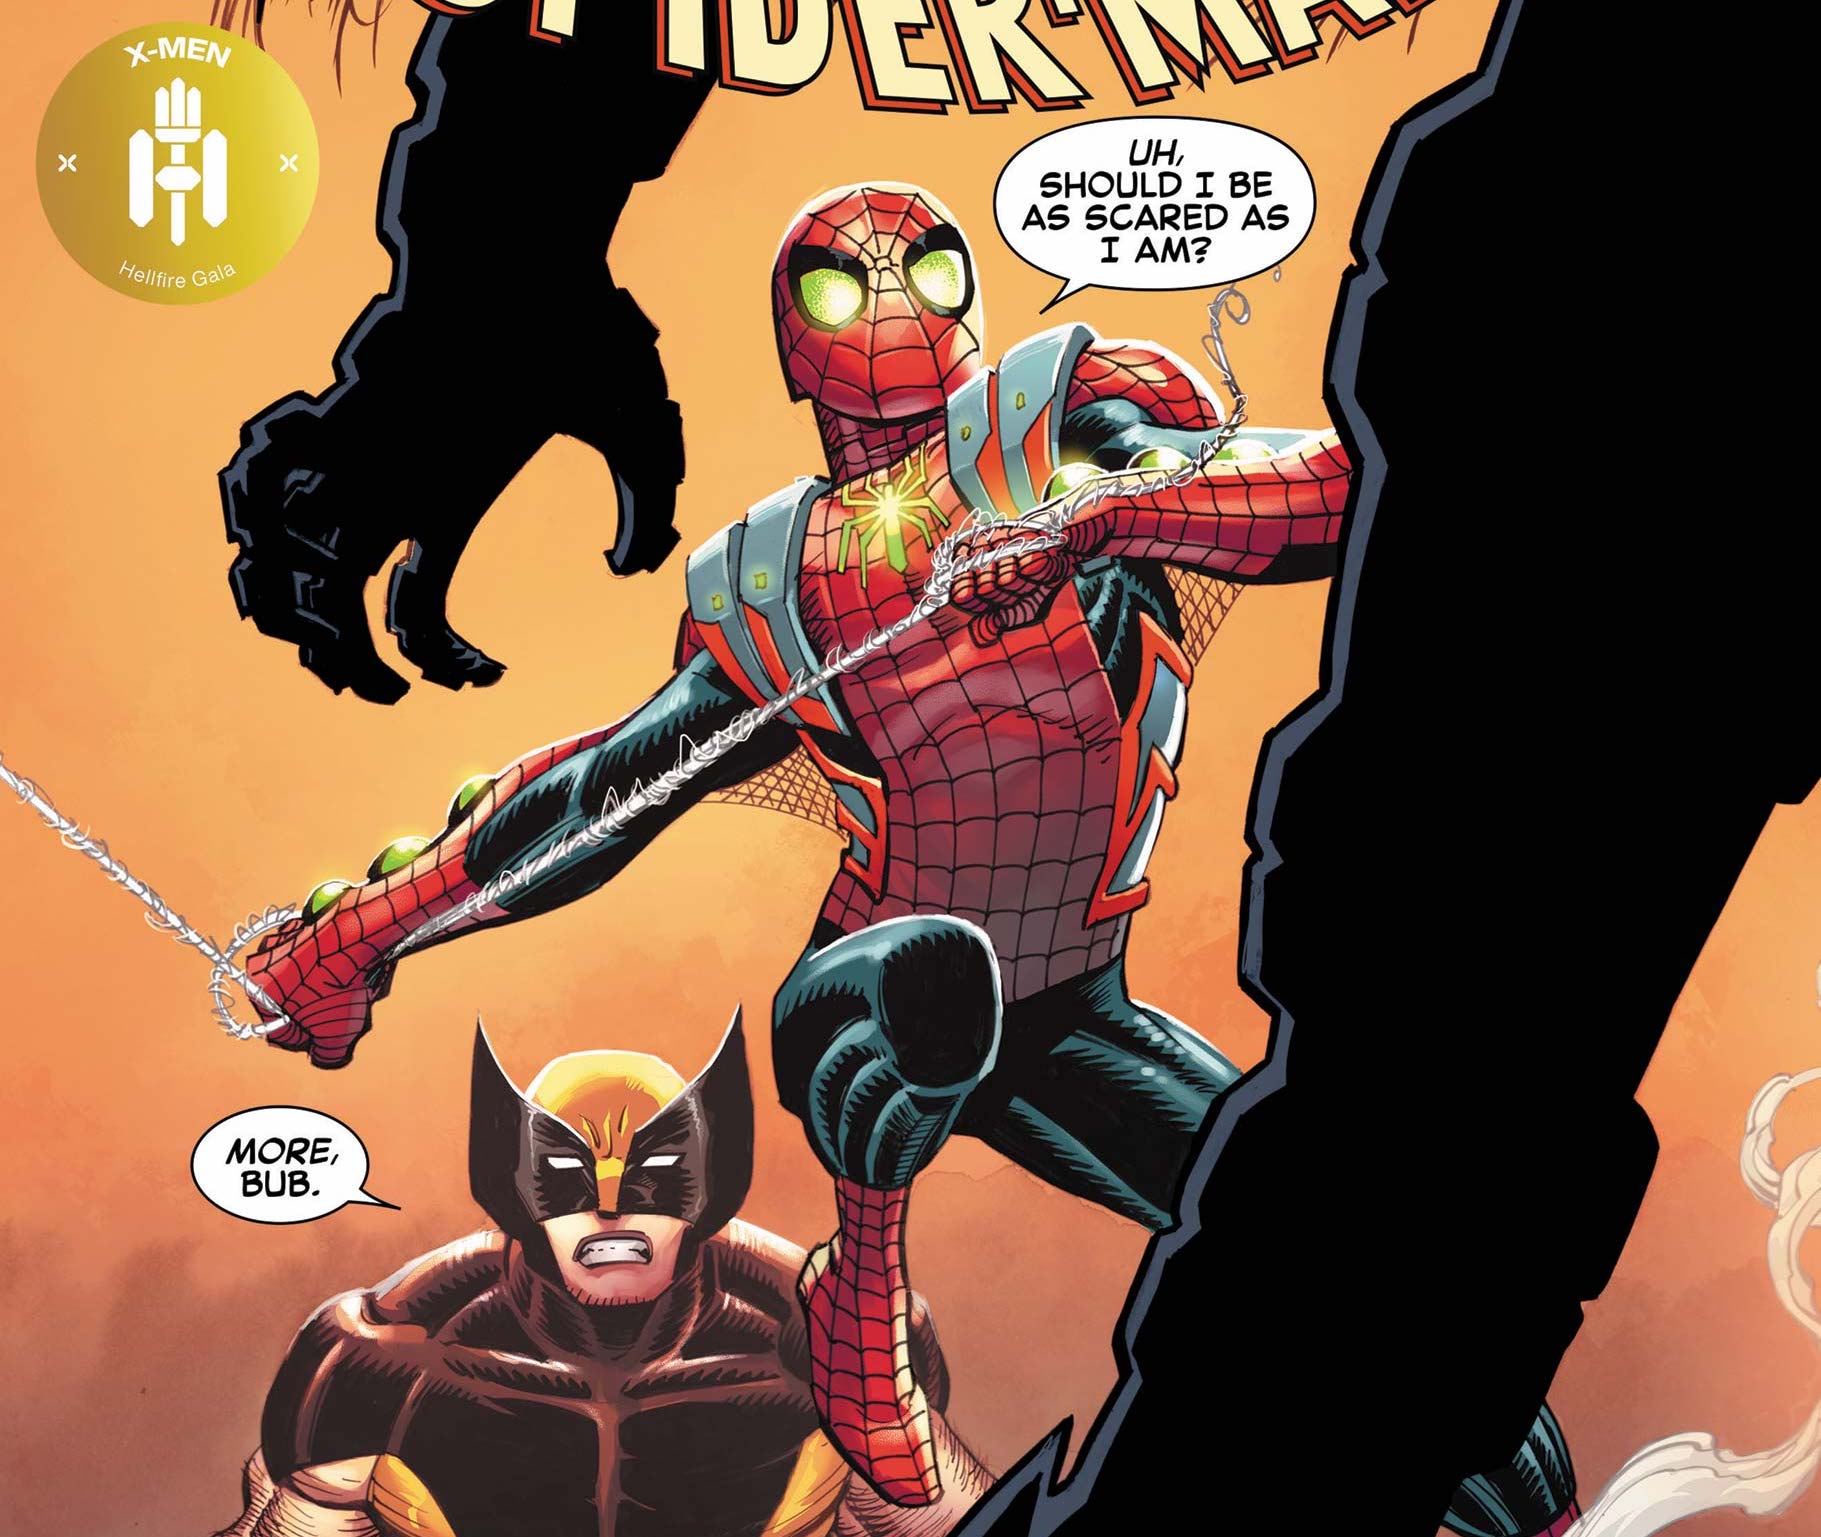 'Amazing Spider-Man' #9 ties into the Hellfire Gala too late